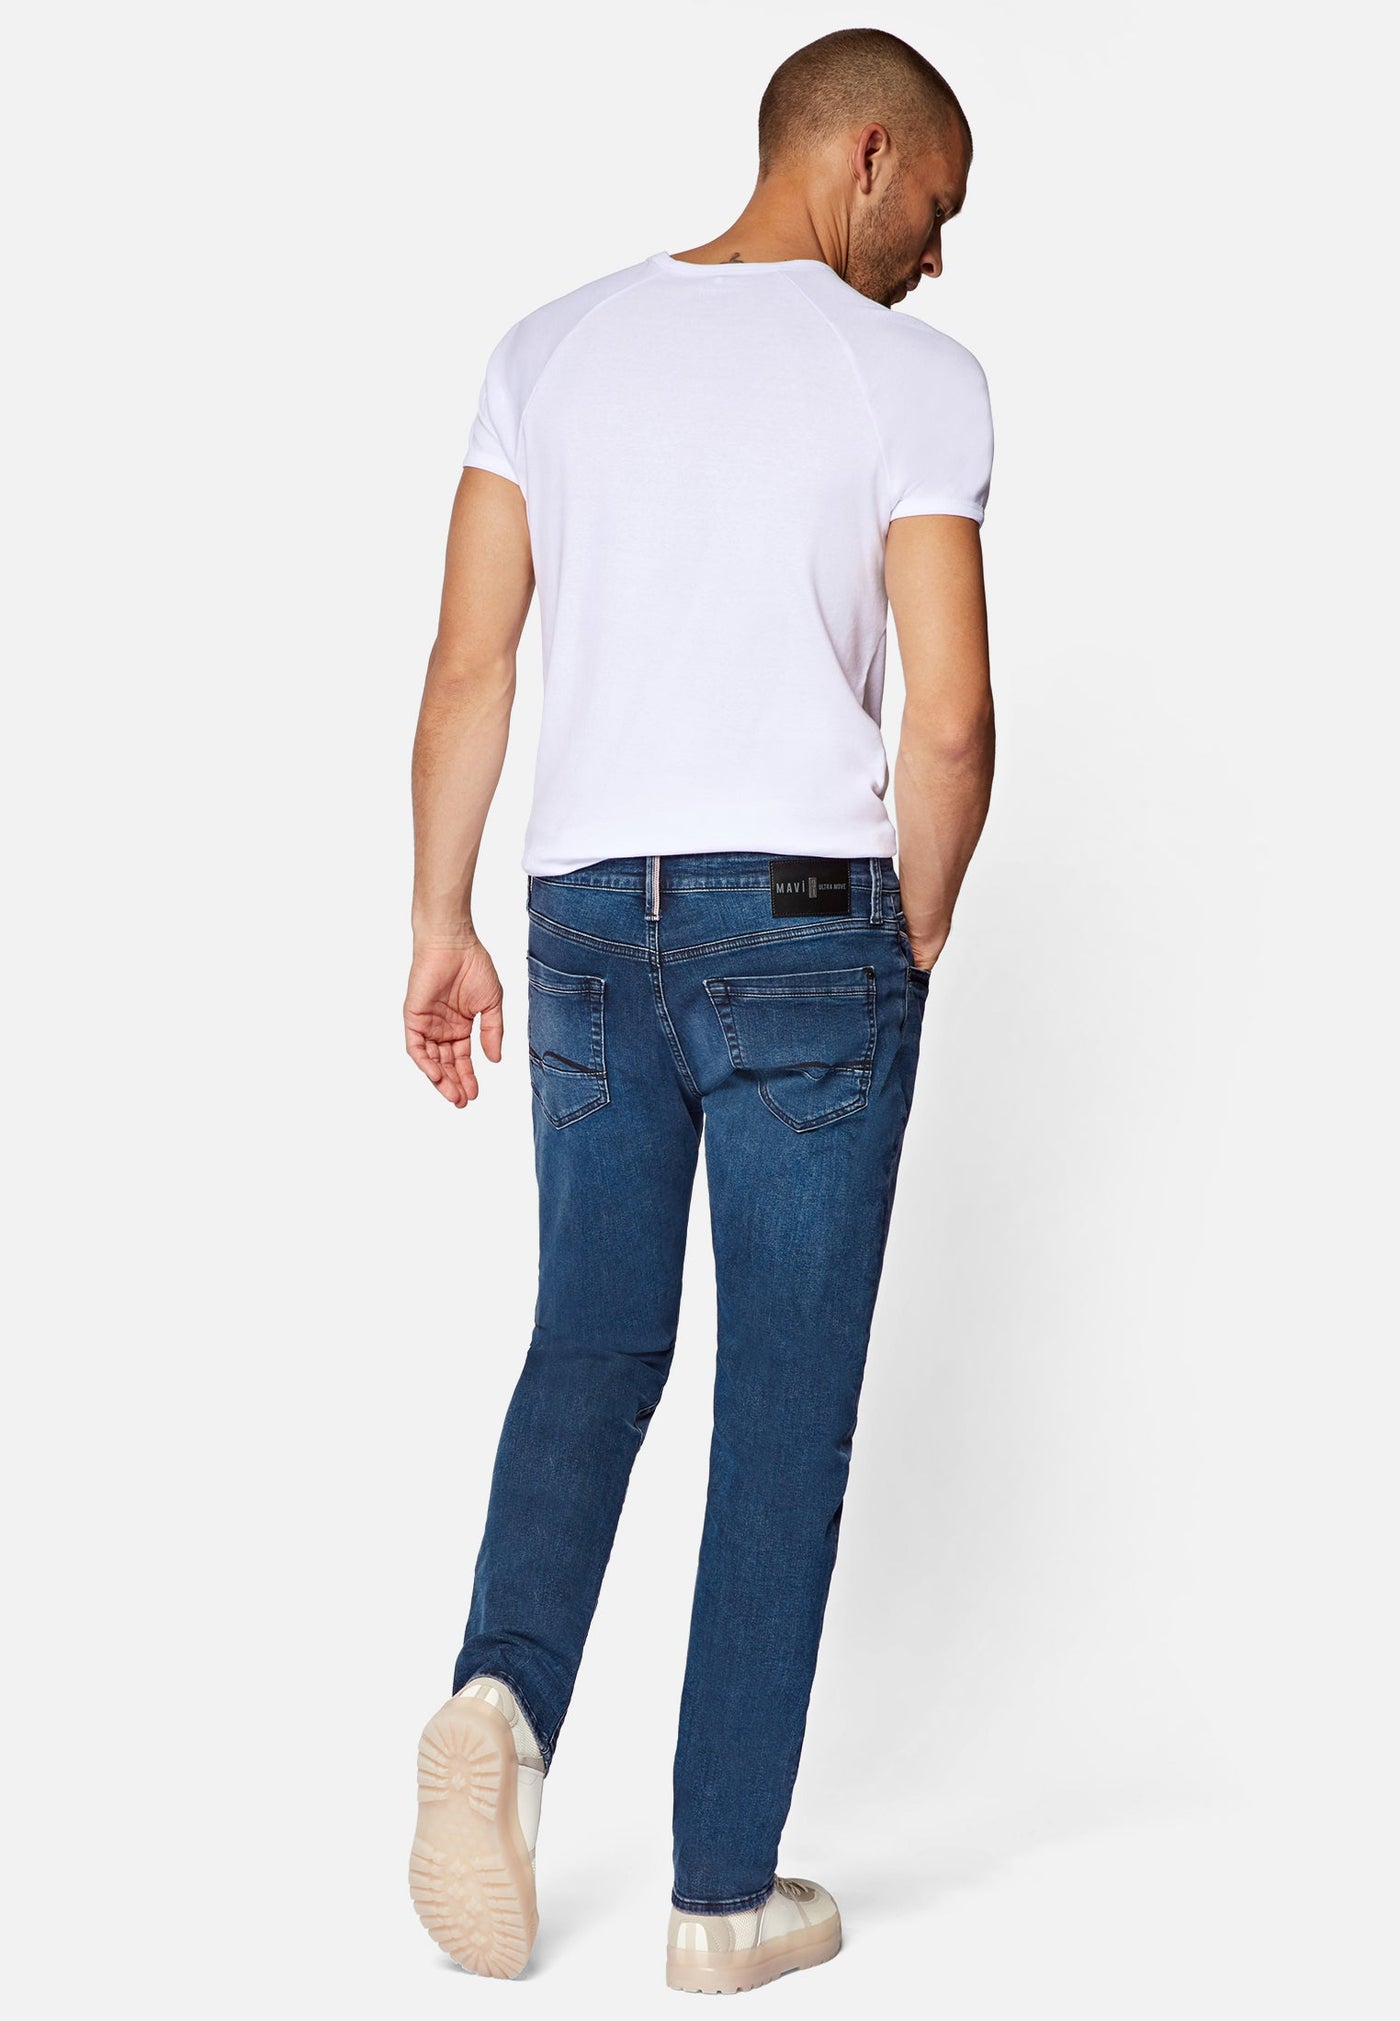 Yves in Ink Brushed Ultra Move Jeans Mavi   